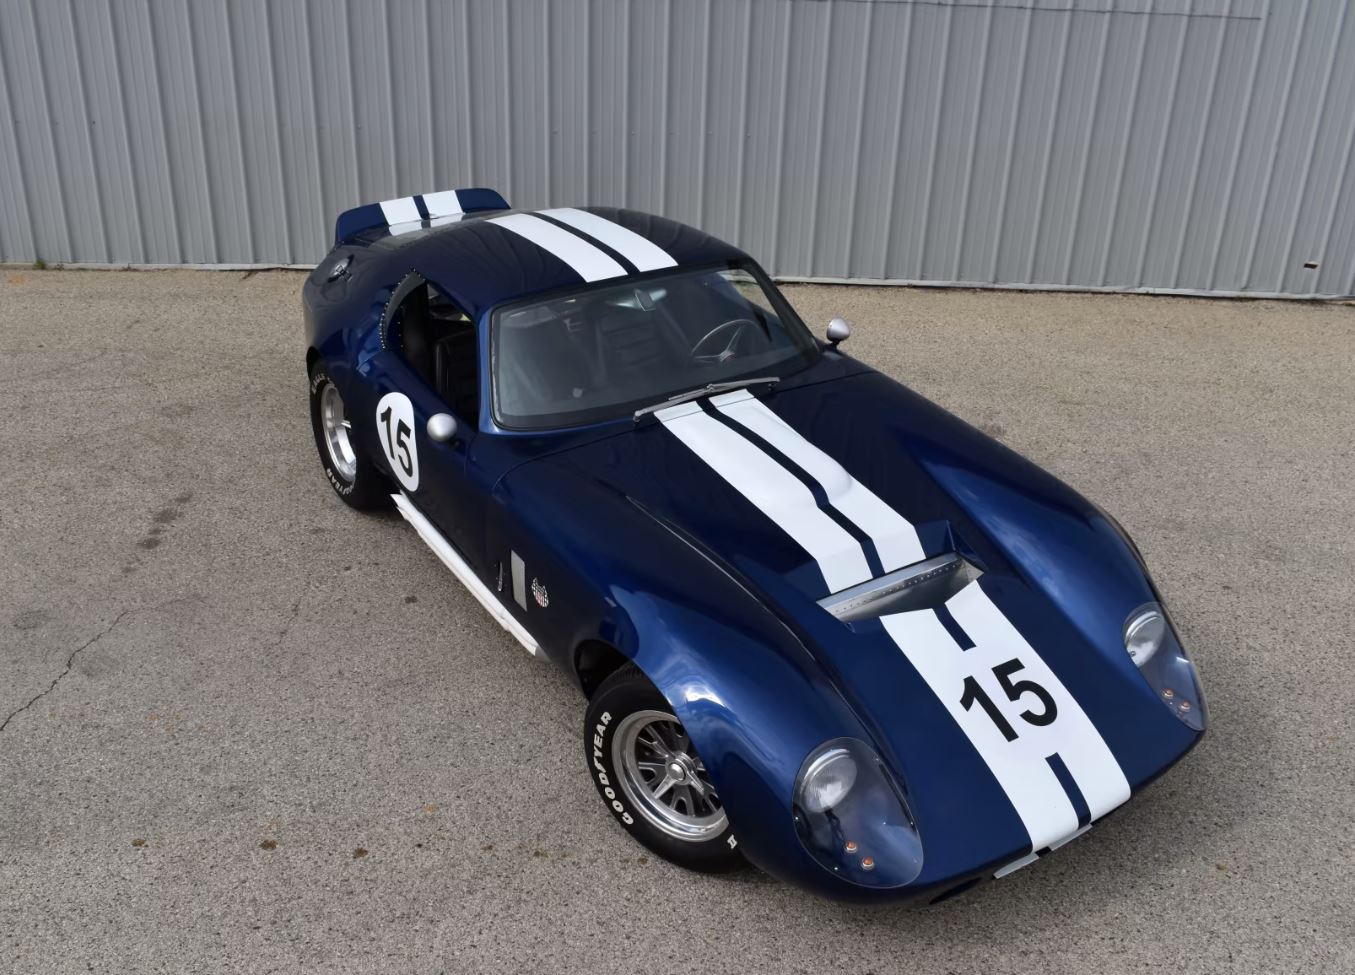 Ford factory five shelby daytona coupe replica mt9g ssqoxmky3l32w6cw